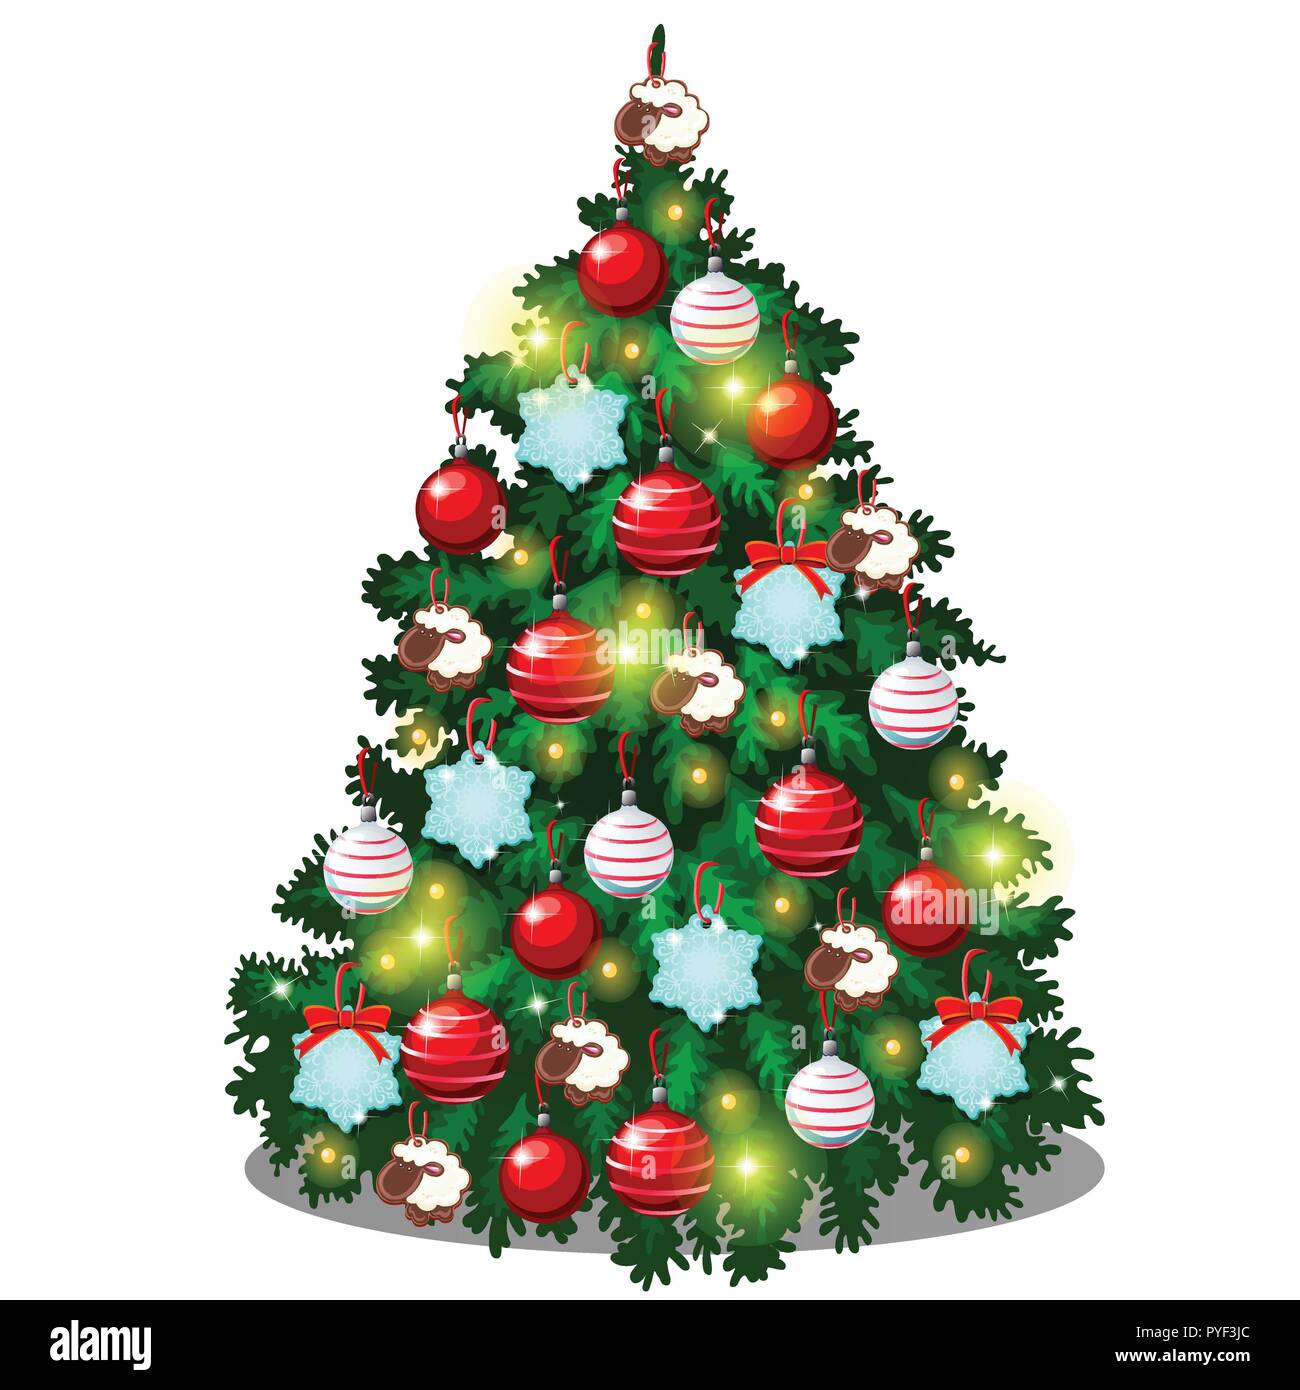 Sketch With Cute Christmas Tree With New Year Gifts, Classic Christmas Decorations And Baubles. Sample Of Poster, Invitation And Other Card. Vector Illustration. Stock Vector